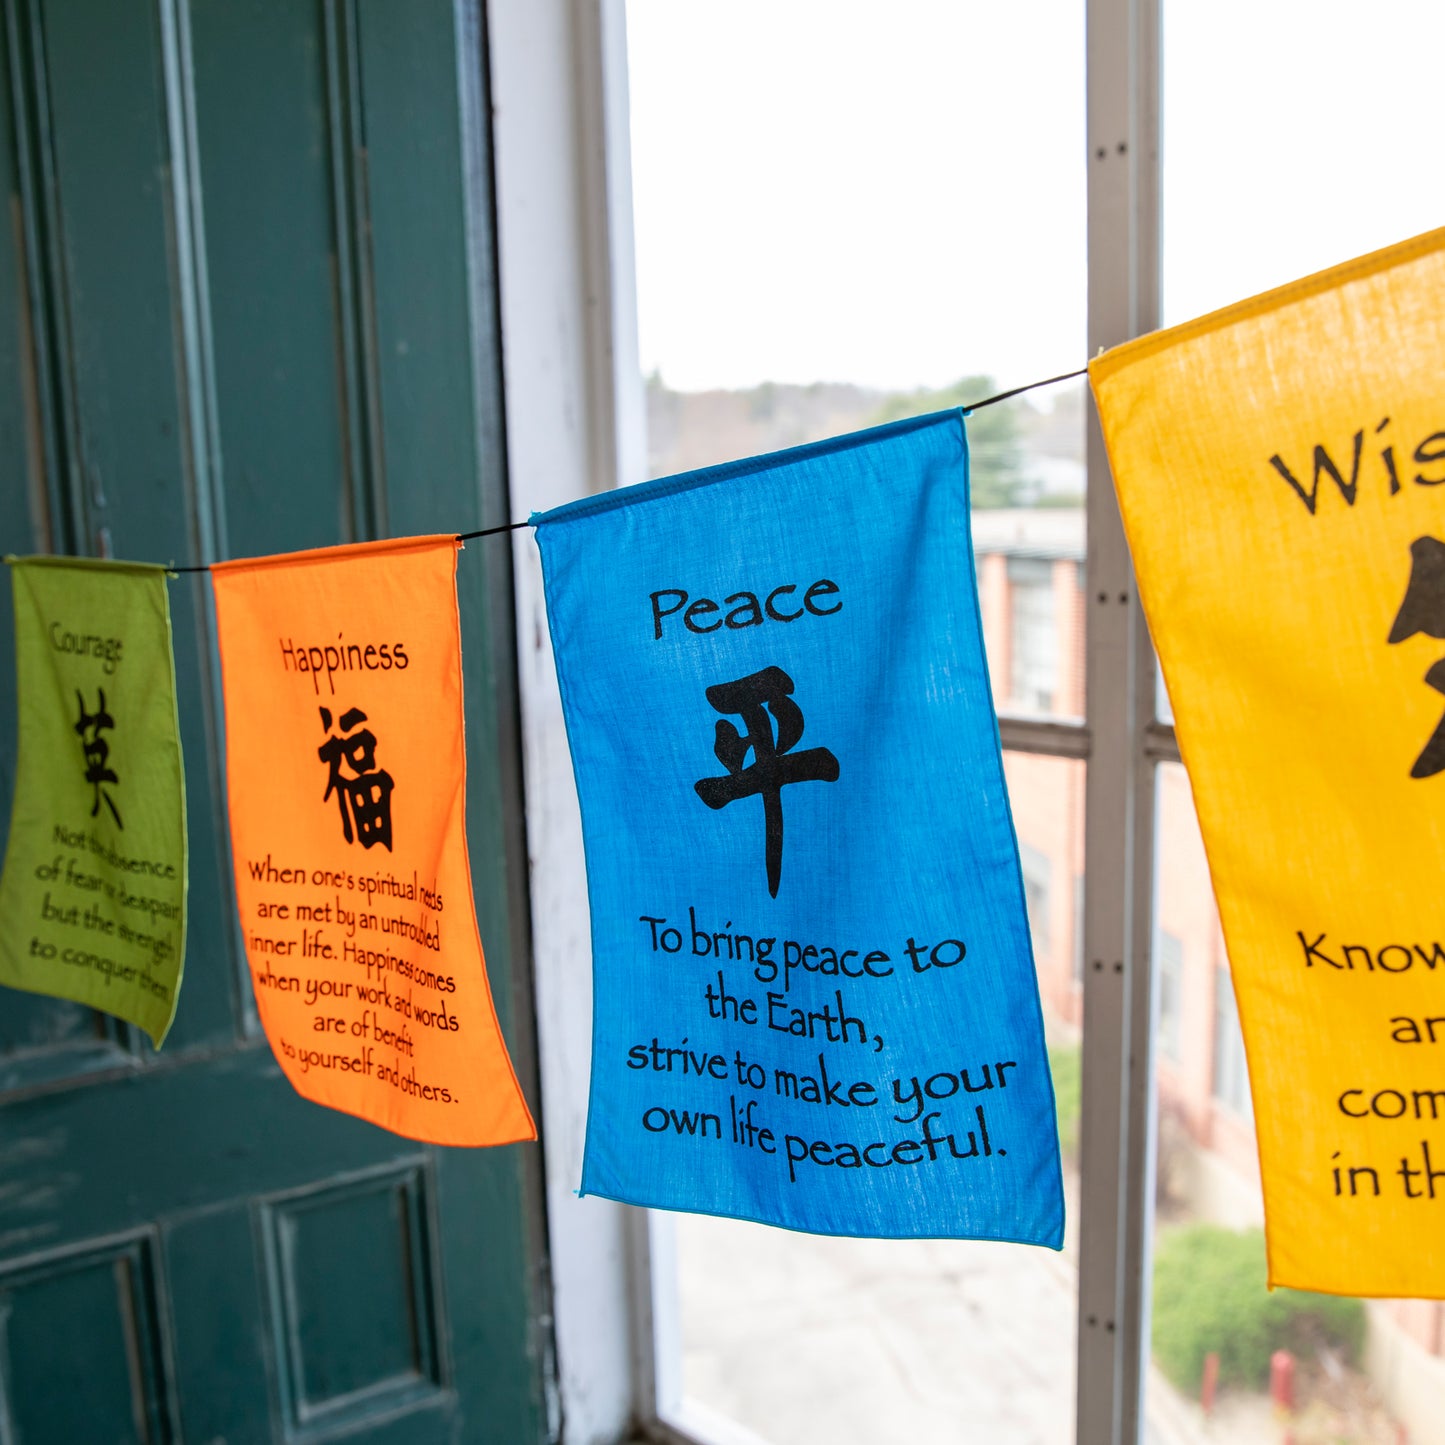 Large Prayer Flag in Bright Colors